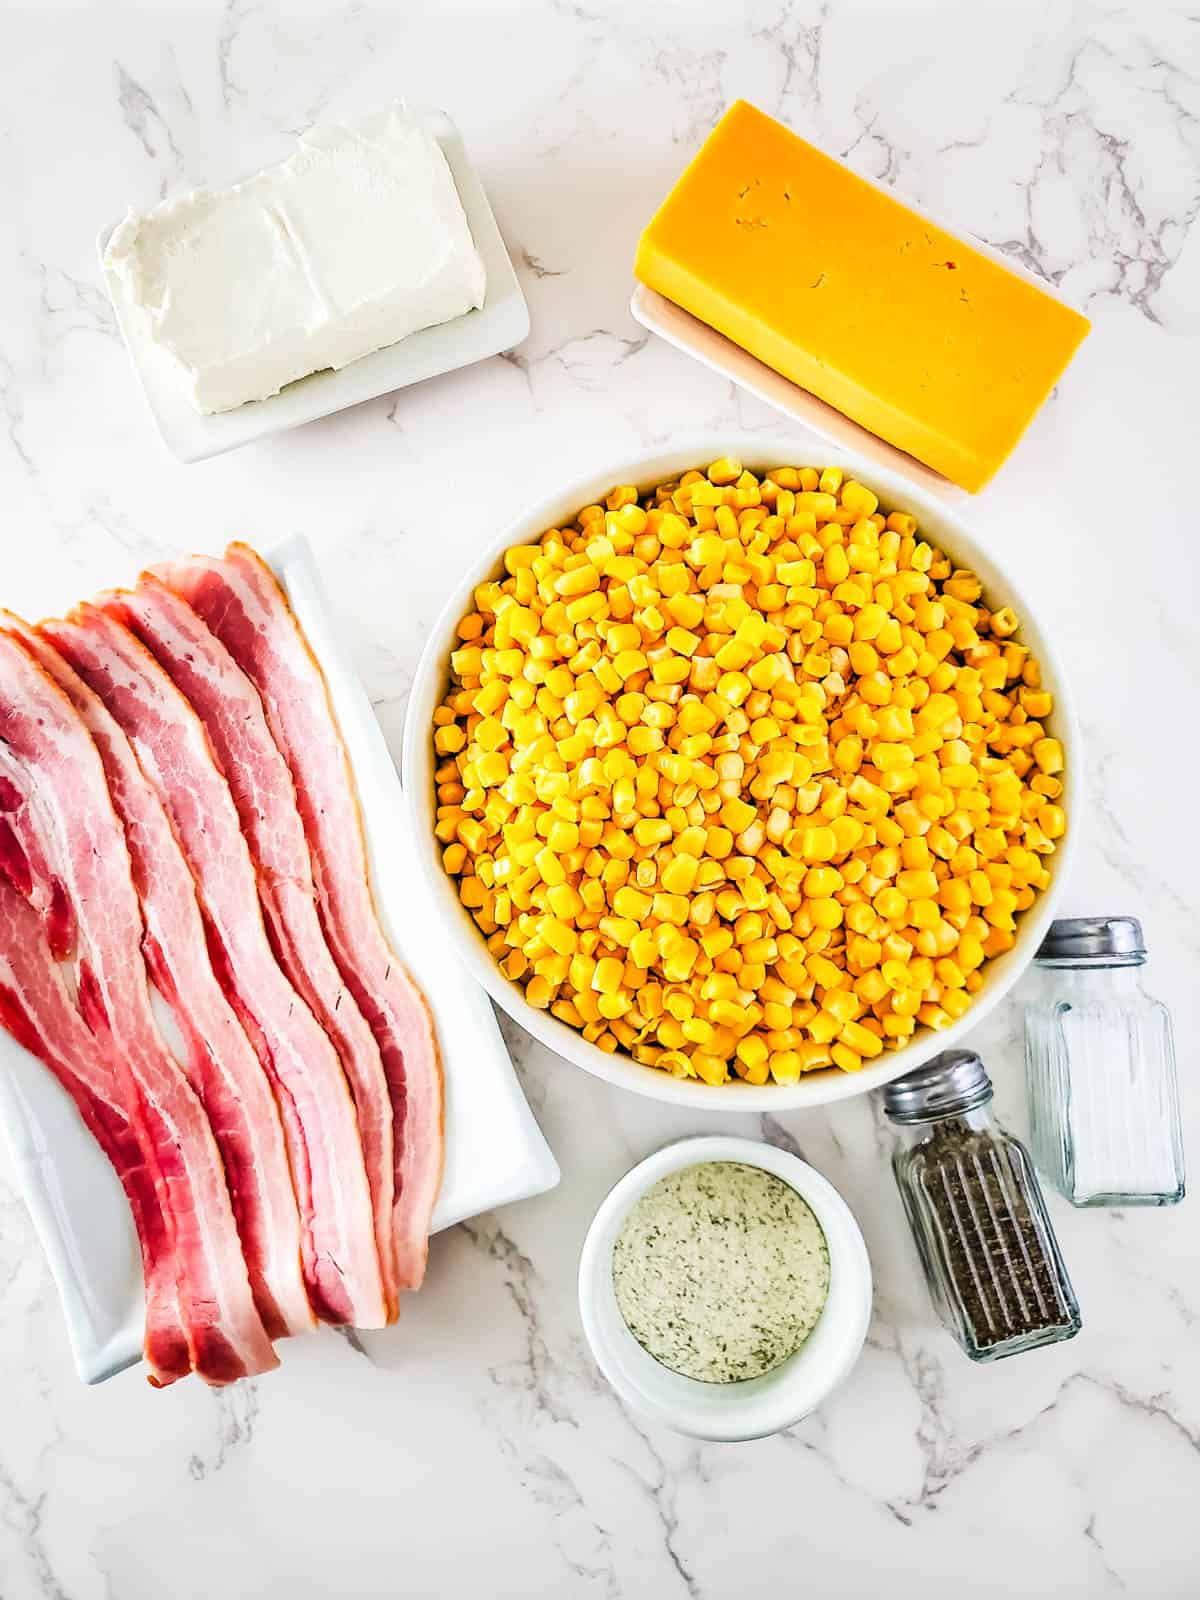 Ingredients to make creamed corn with cream cheese and bacon in a crockpot.